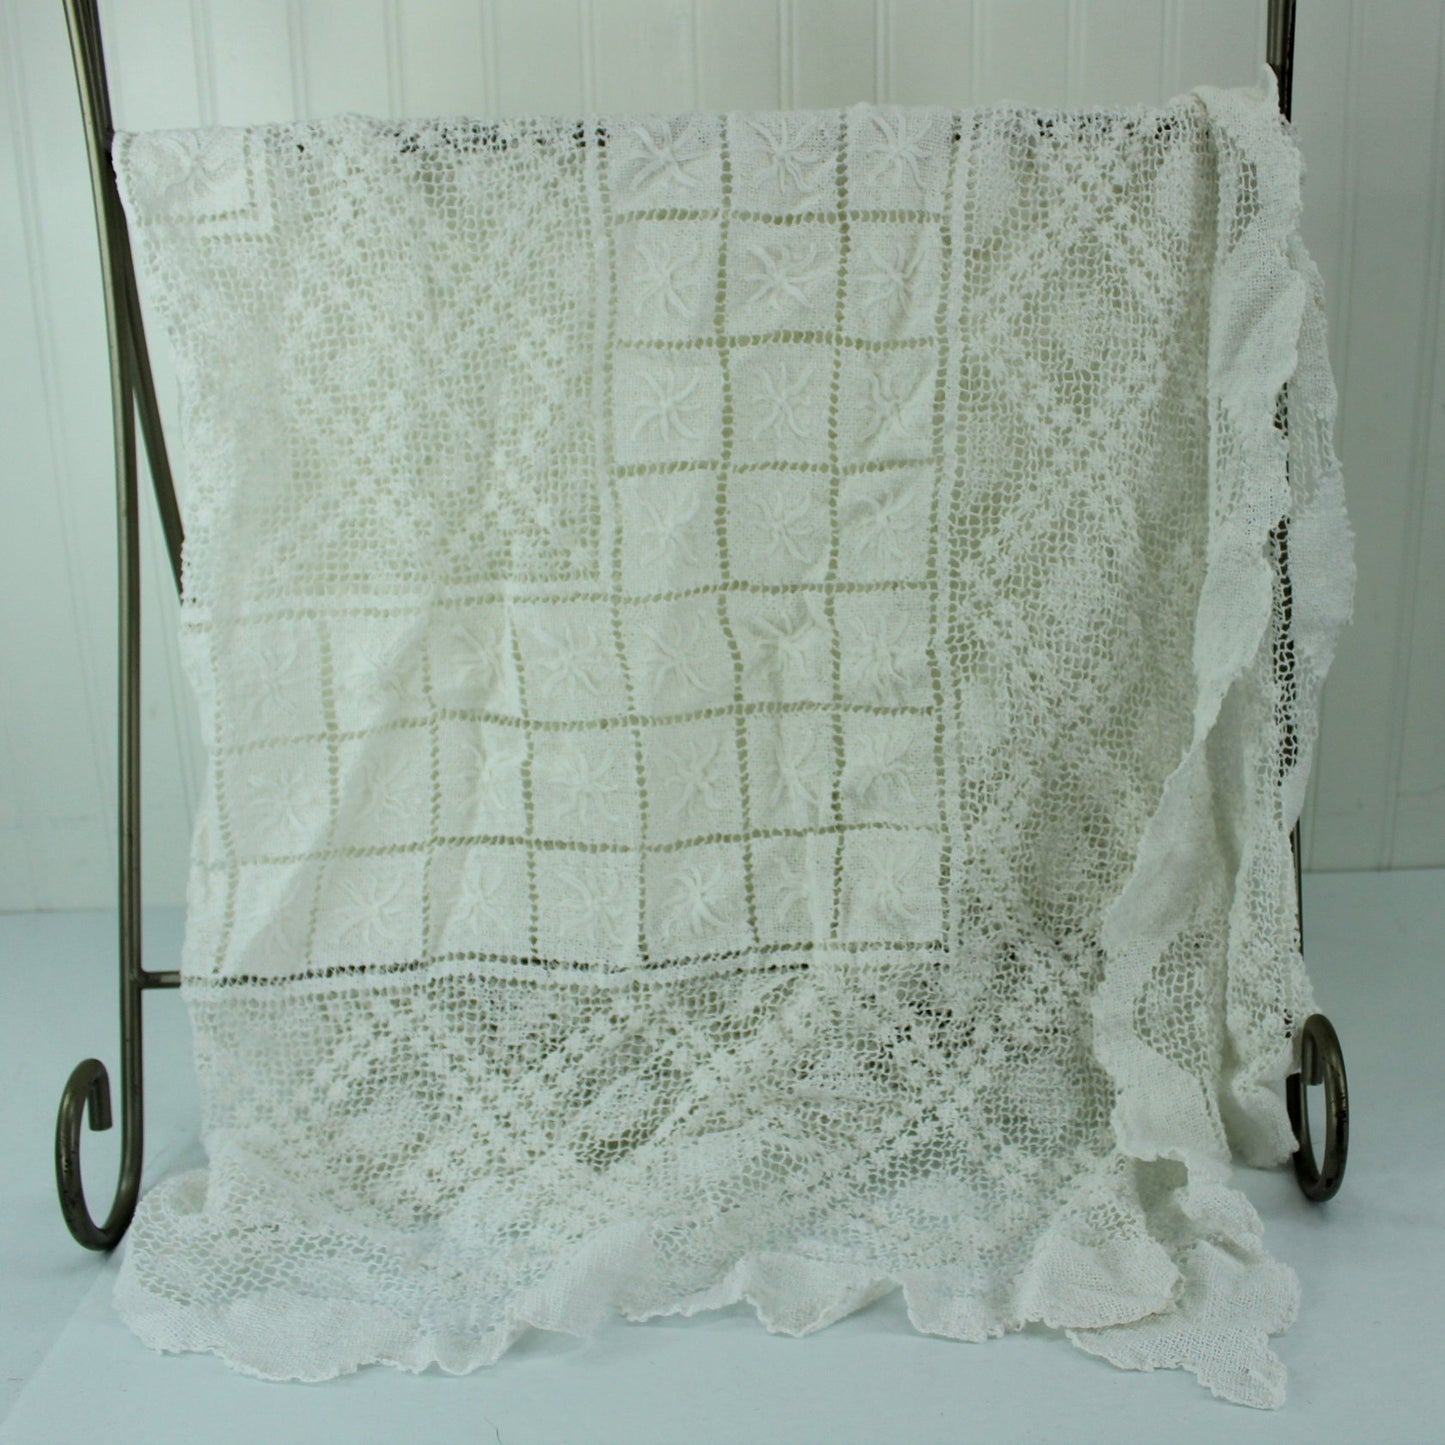 Older 1940s 50s Lace White Table Cloth Elegant Hevy Vraiety Weave 75" X 90" approx 1/4 of cloth